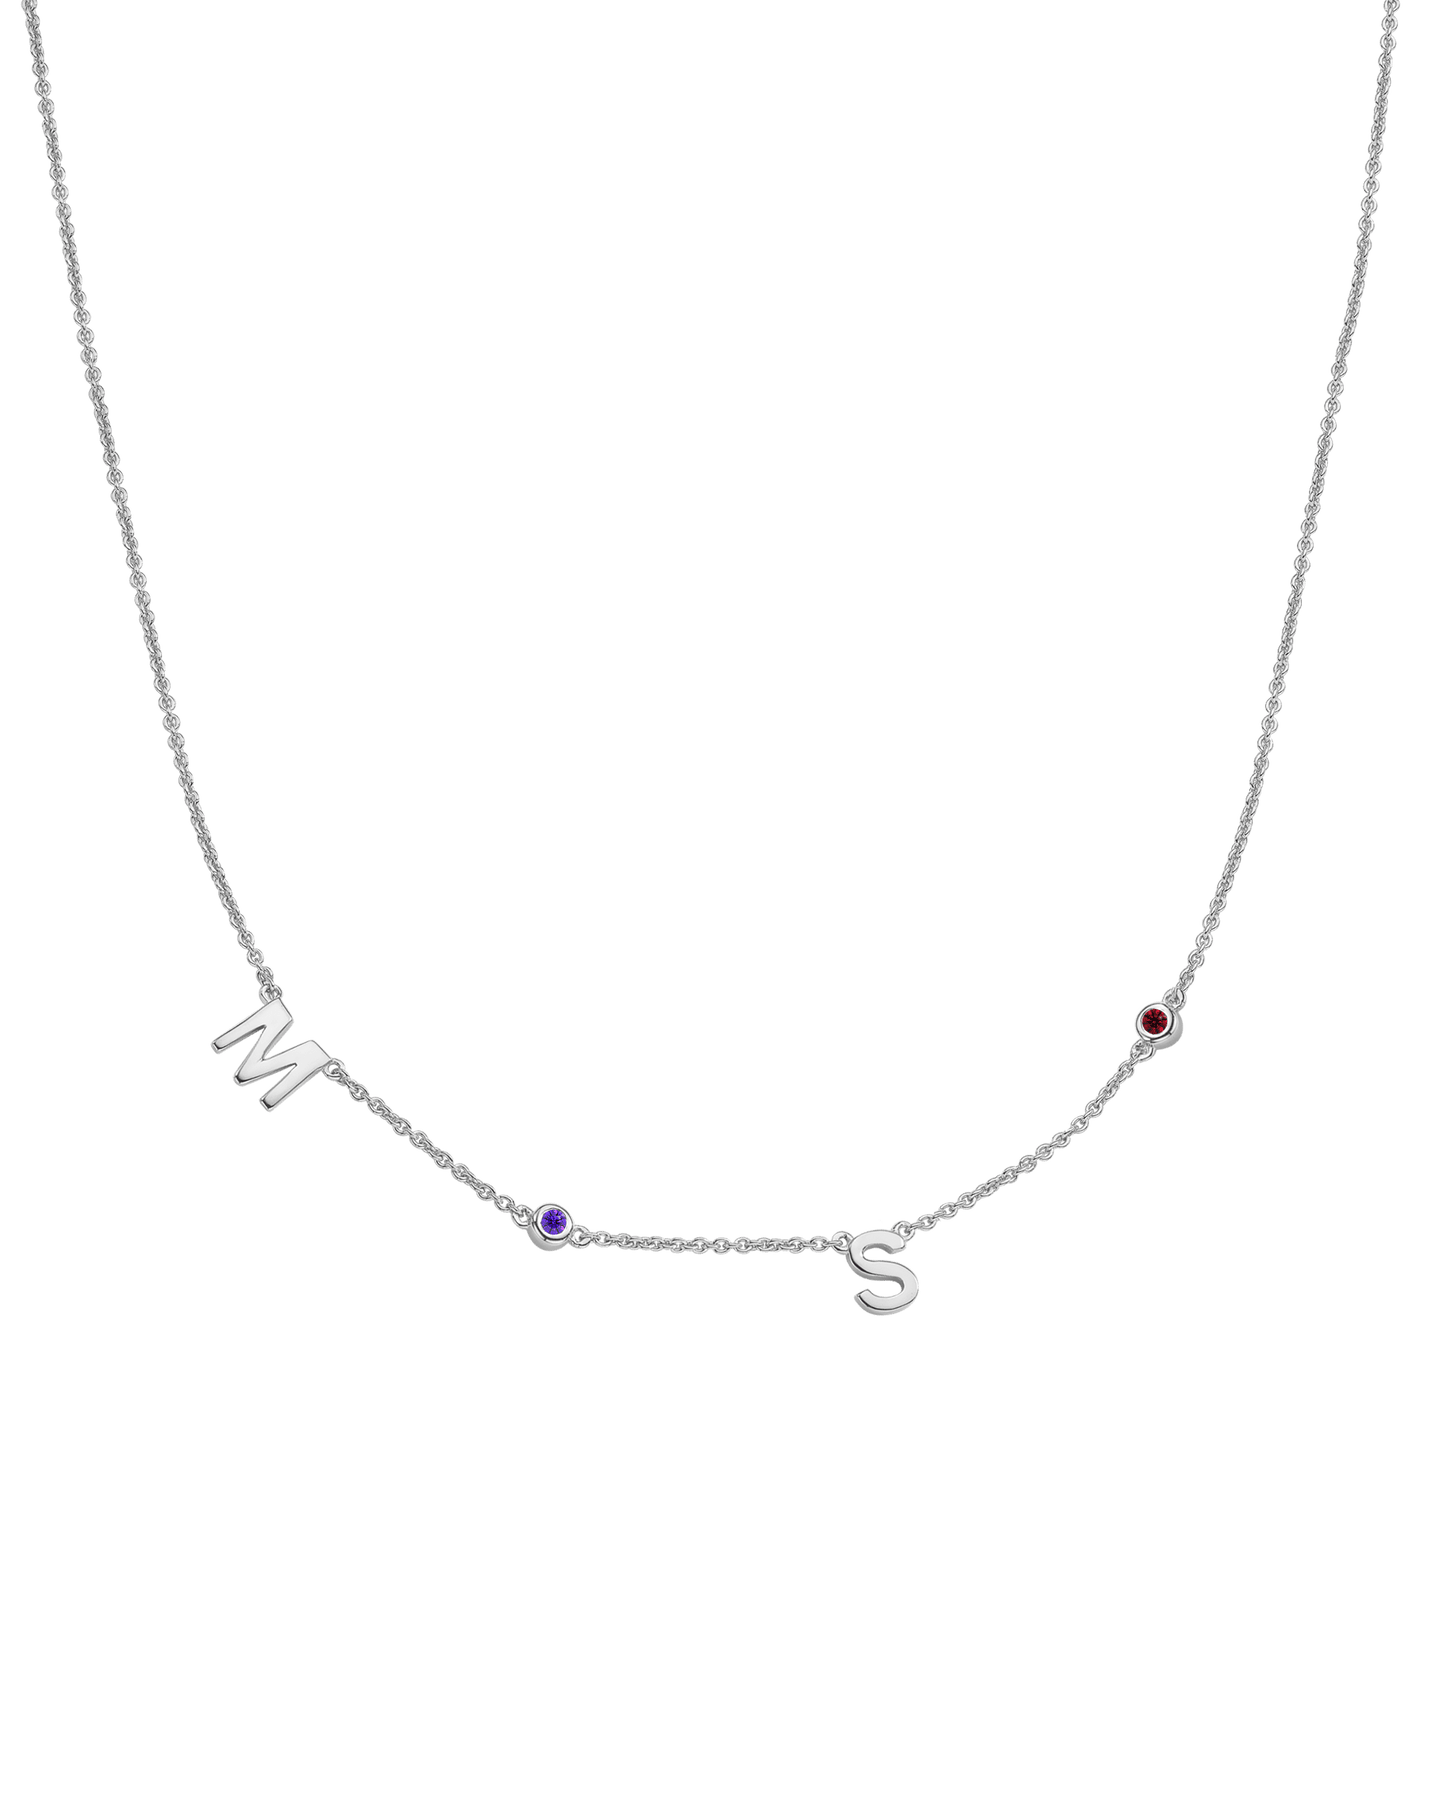 Initial Birthstone Necklace - 925 Sterling Silver Necklaces magal-dev 2 Initials + 2 Birthstones Adjustable 16-17" (40cm-43cm) 